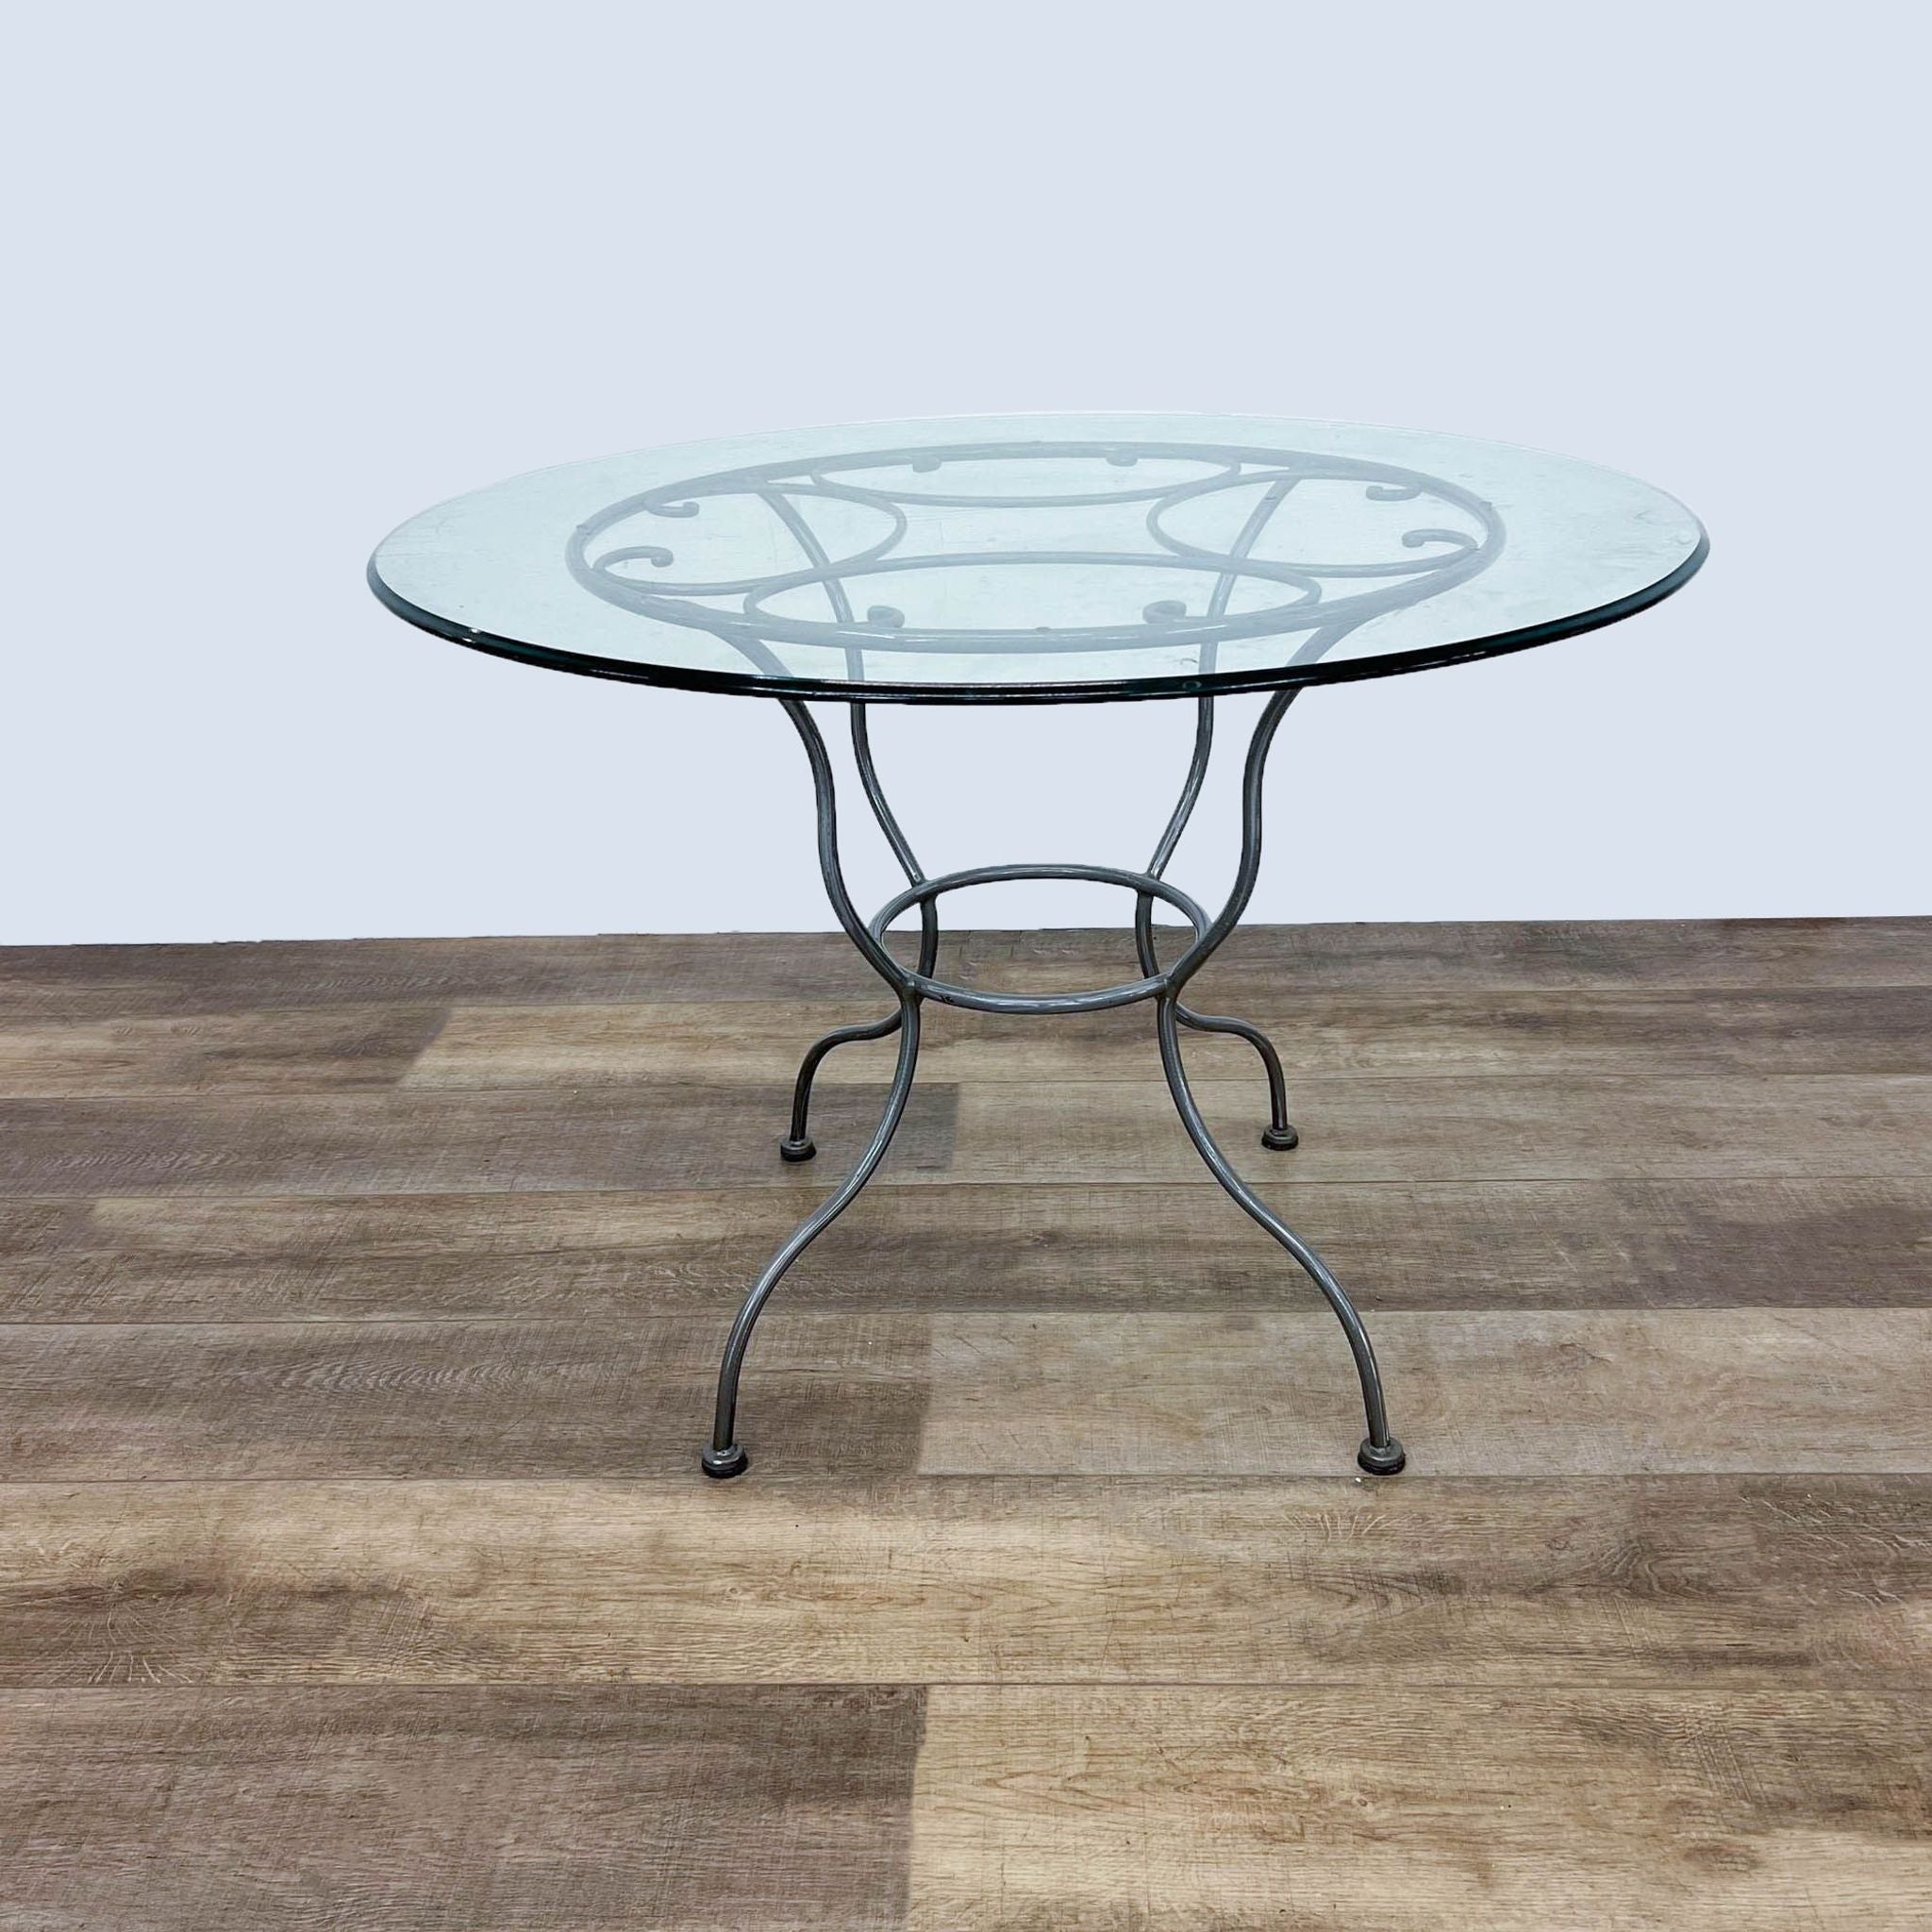 Reperch brand contemporary dining table with tempered glass top and metal base, viewed from an angle.